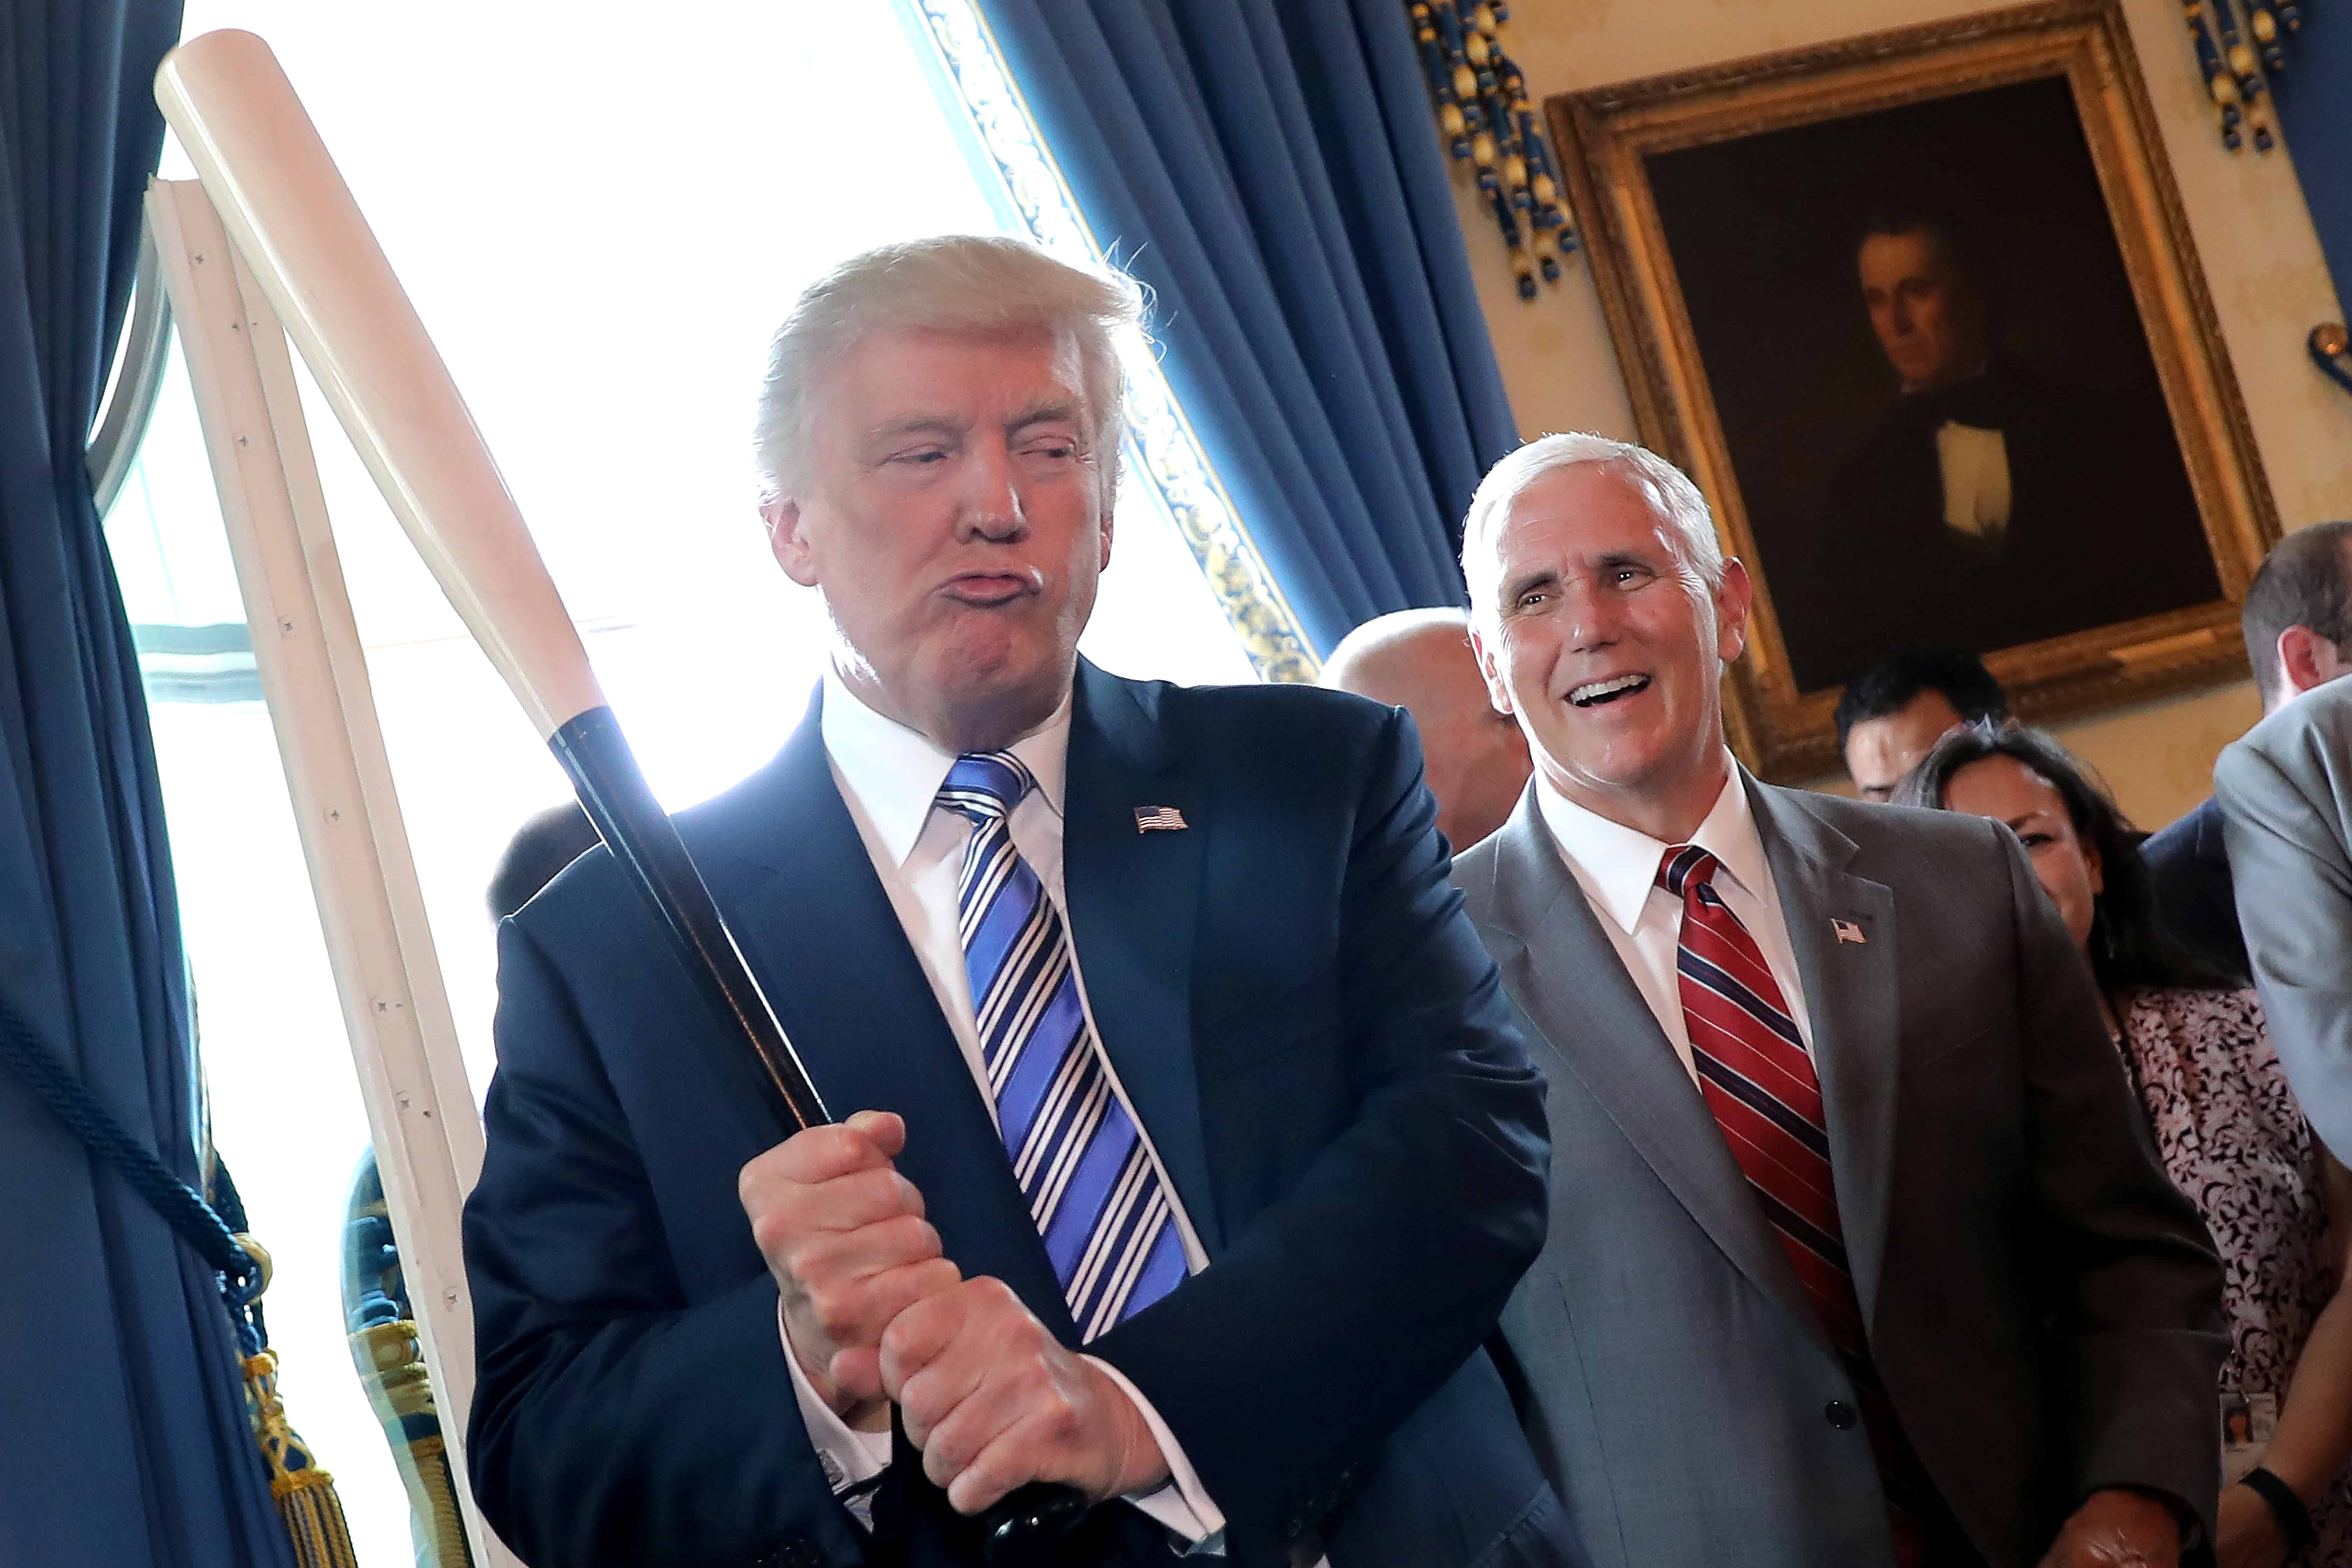 Vice President Mike Pence laughs as U.S. President Donald Trump holds a baseball bat as they attend a Made in America product showcase event at the White House in Washington, U.S.